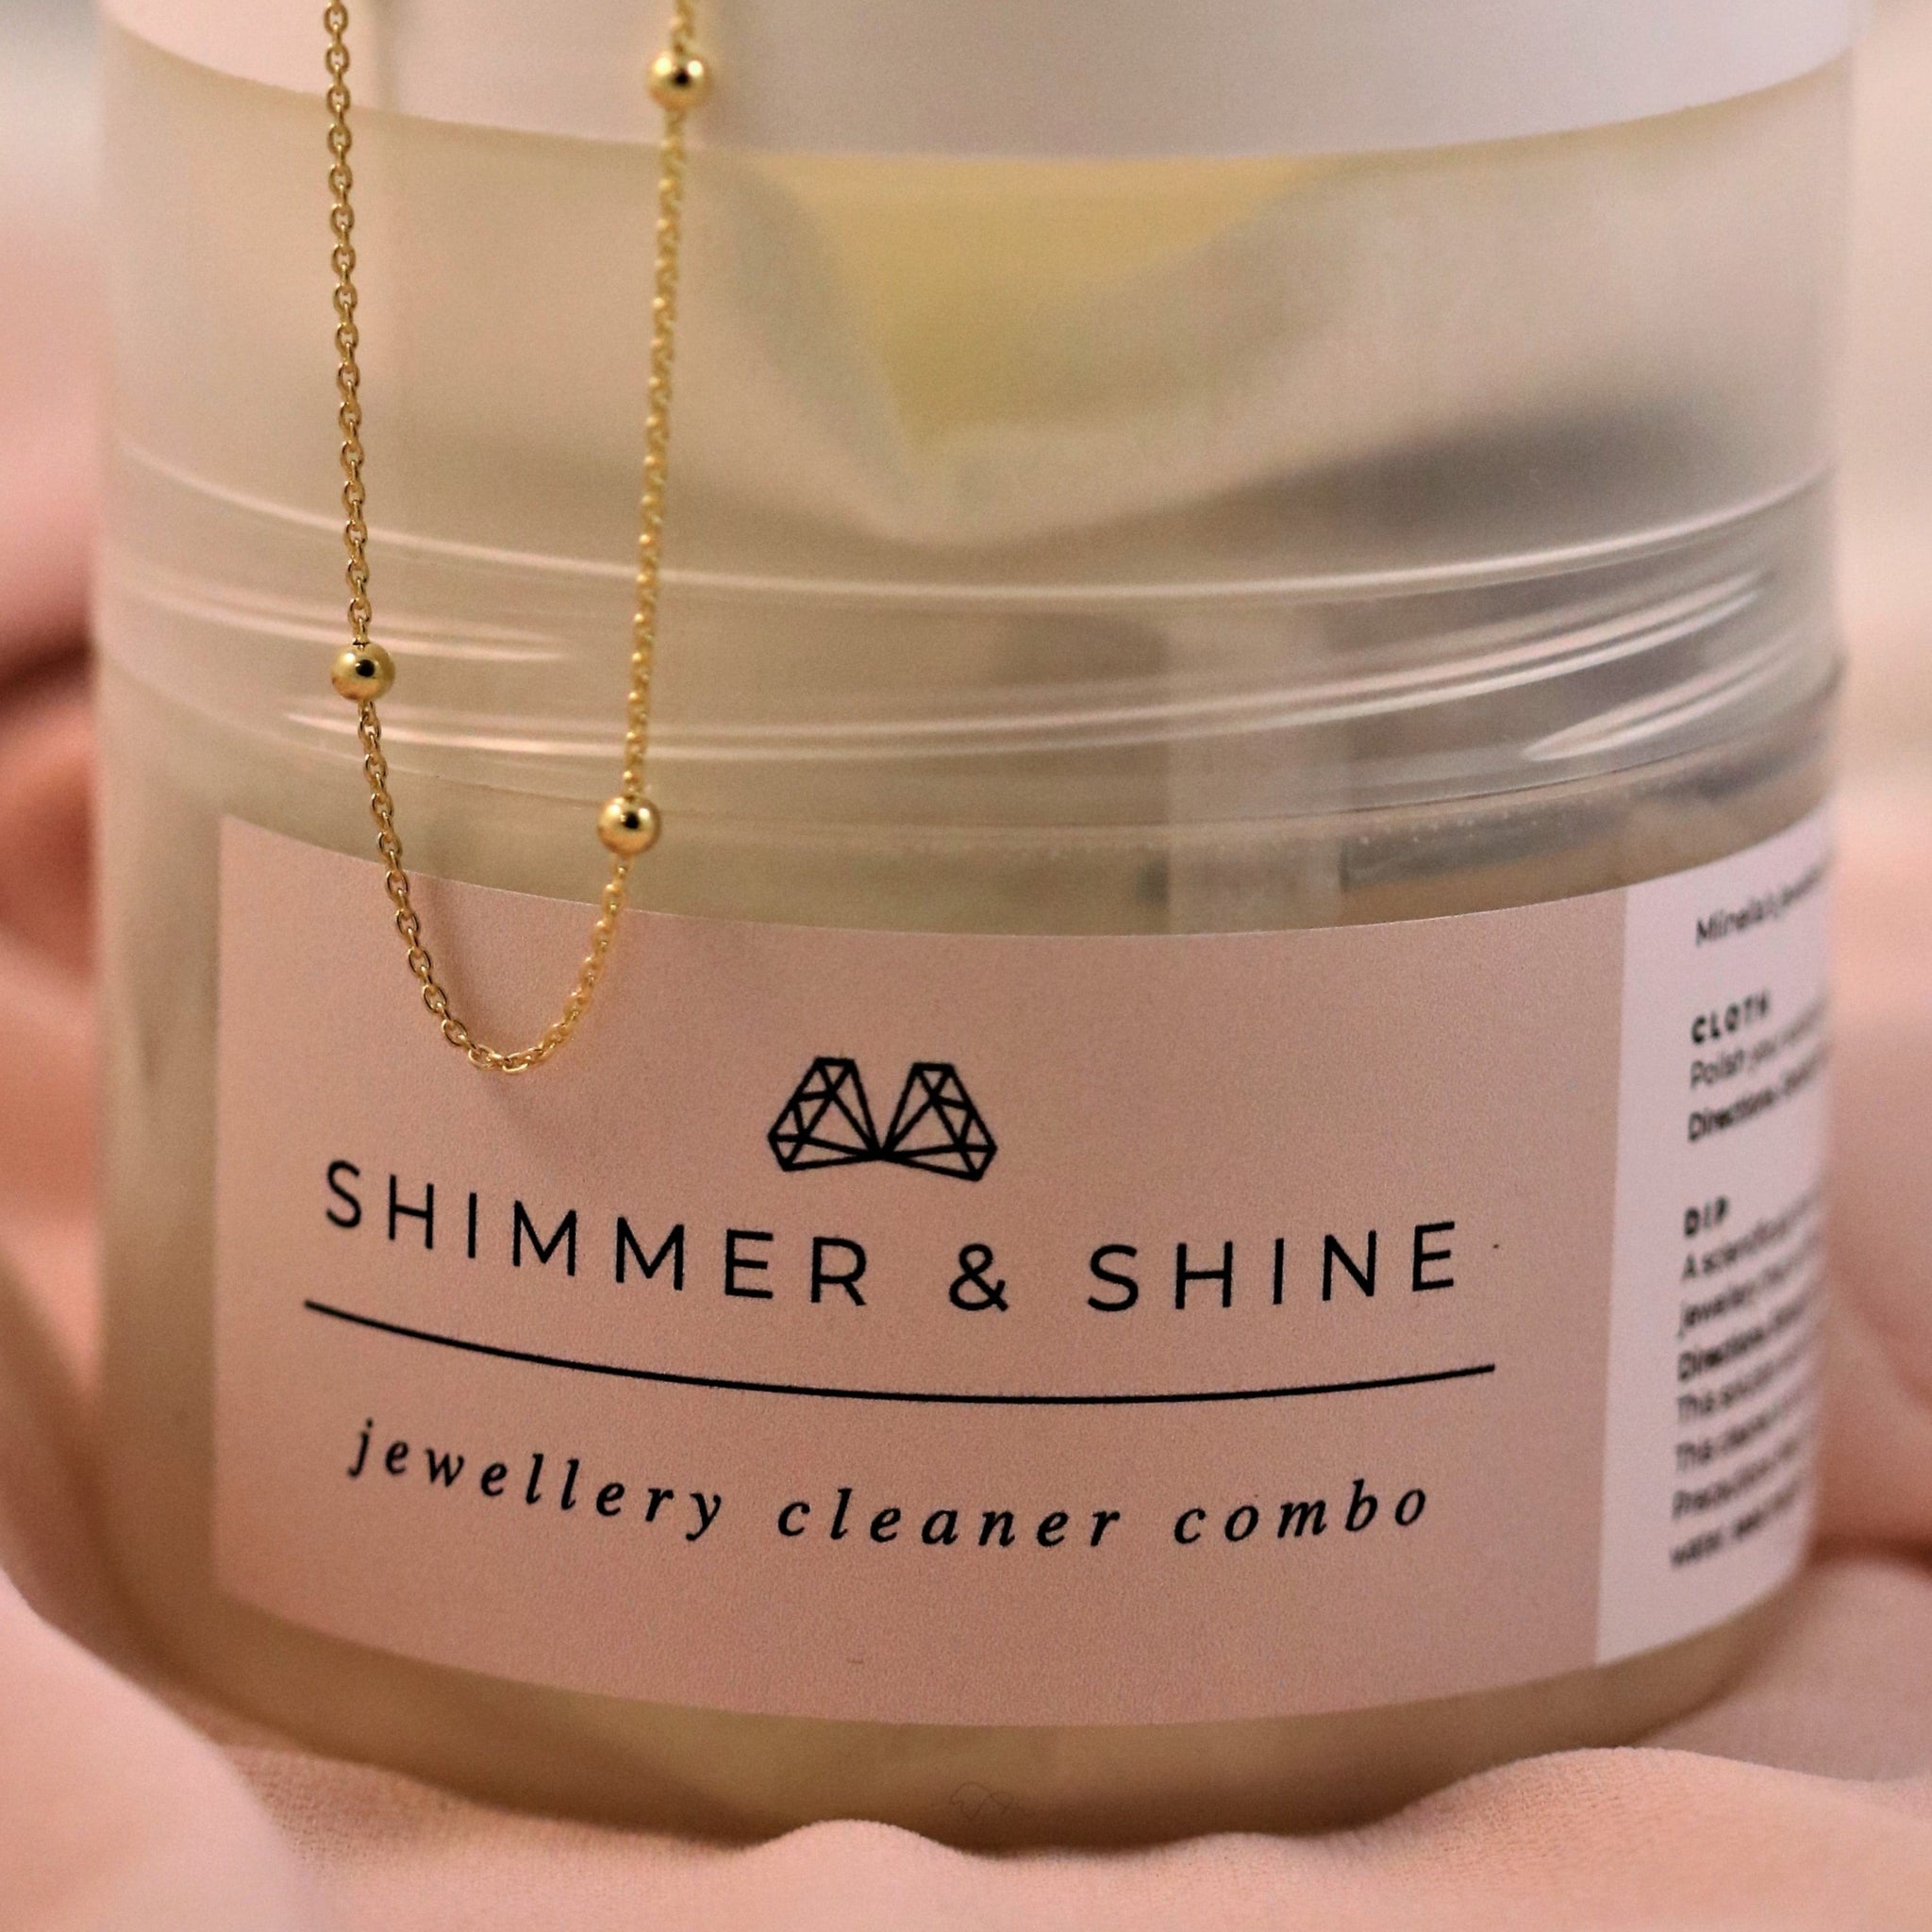 Shimmer & Shine Jewellery Combo Cleaner